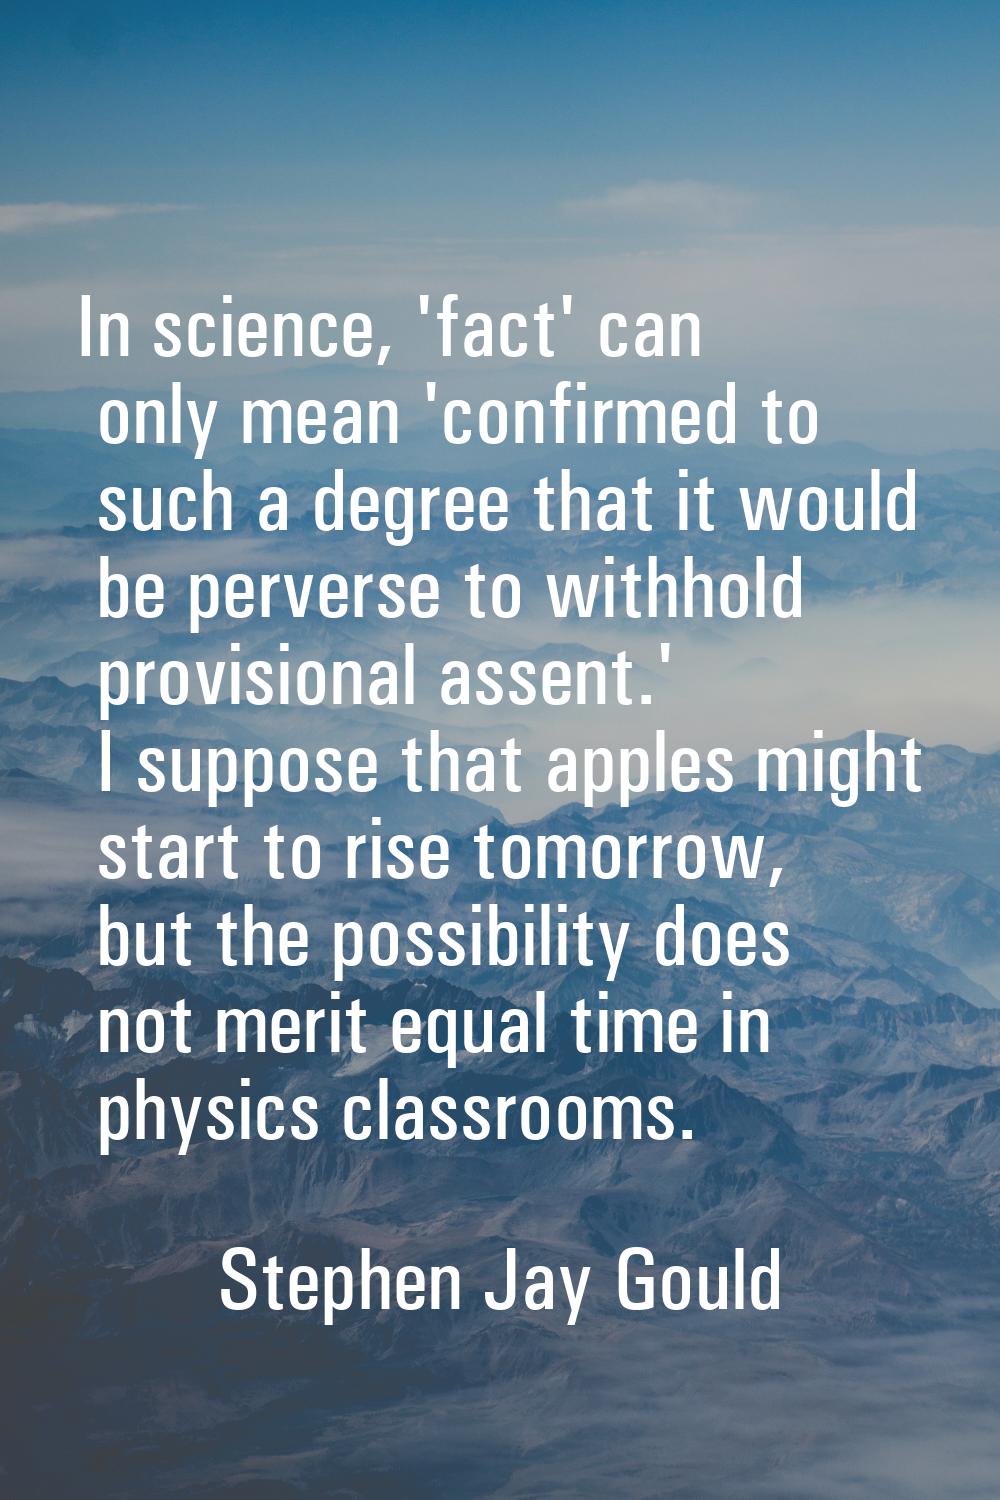 In science, 'fact' can only mean 'confirmed to such a degree that it would be perverse to withhold 